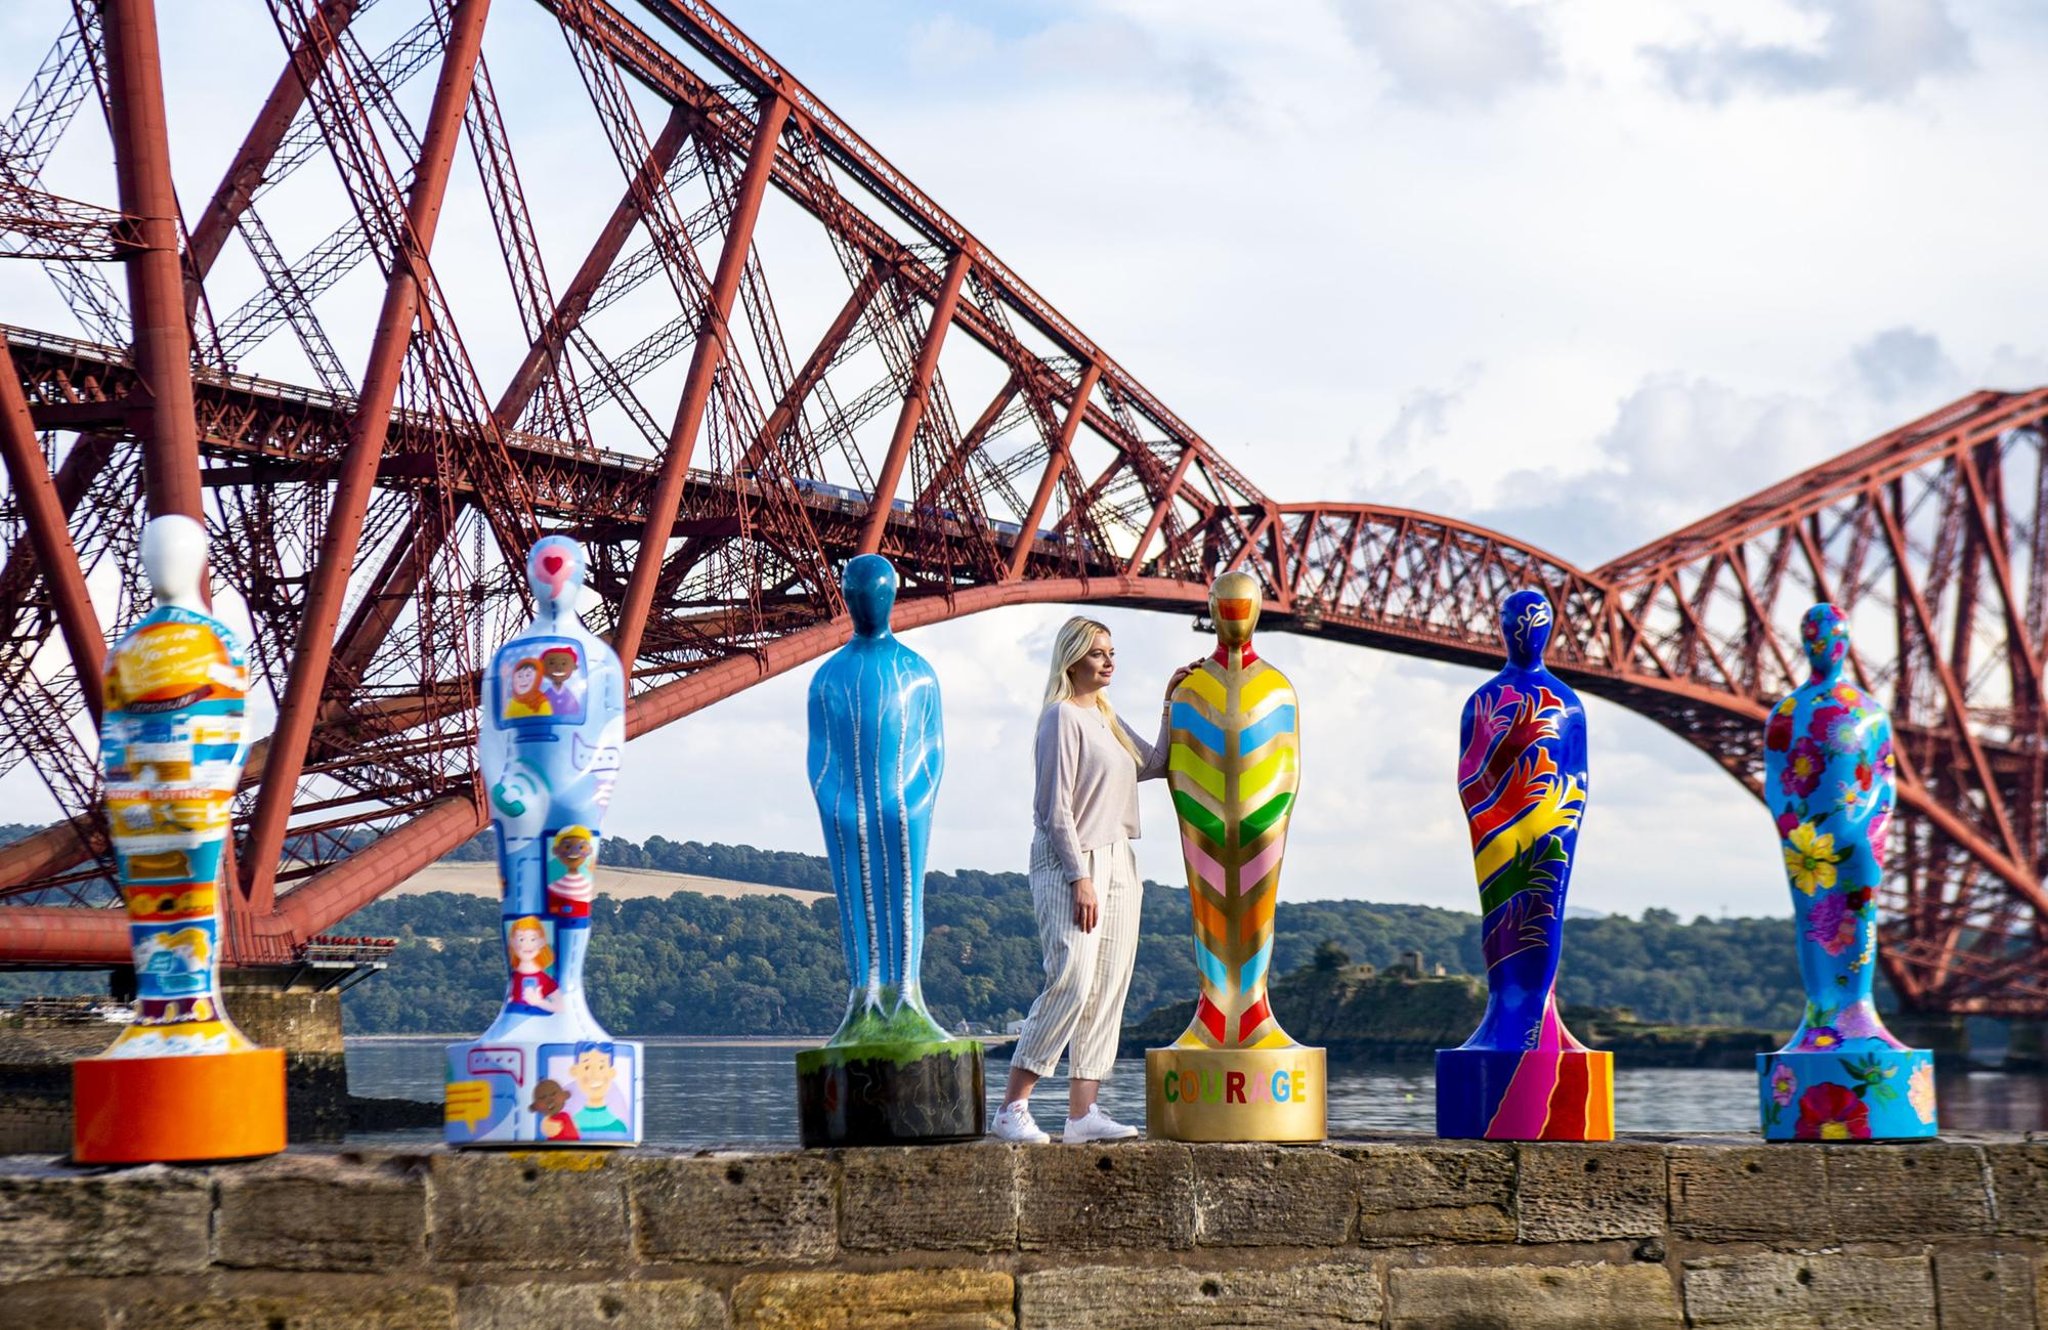 Edinburgh Sculptures to Thank Key Workers Spotted on tour Ahead of Exhibition!